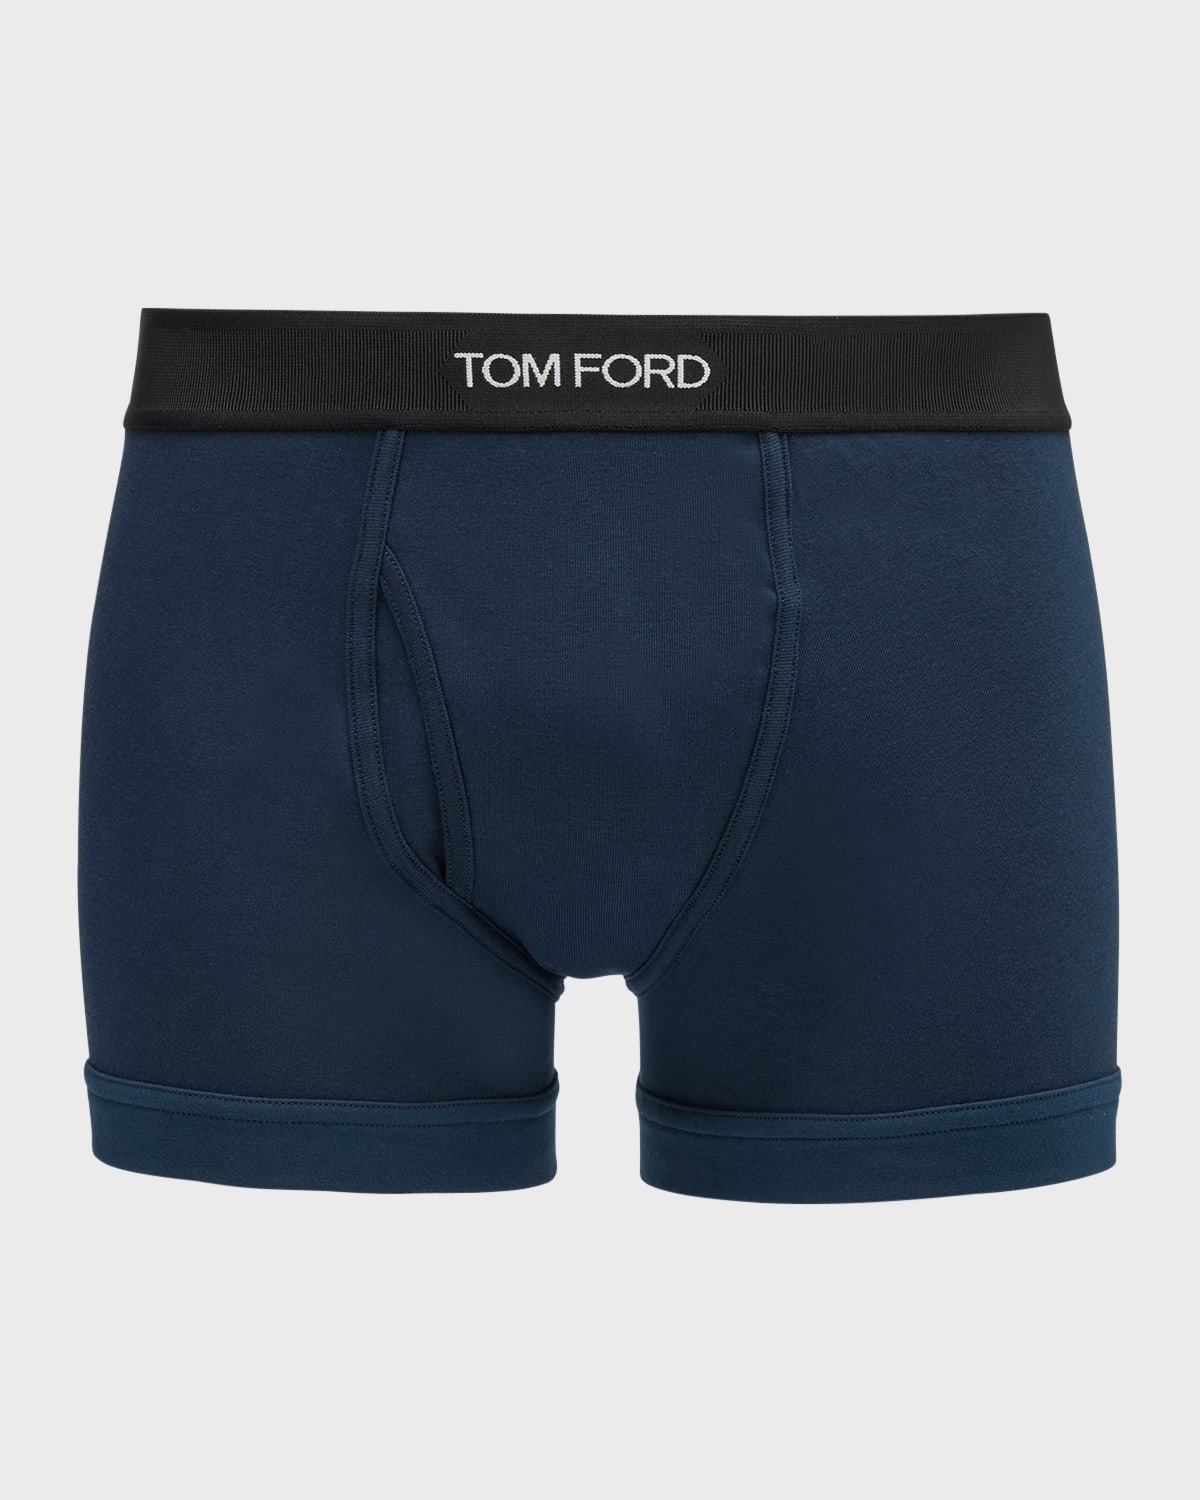 TOM FORD MEN'S 2-PACK SOLID JERSEY BOXER BRIEFS